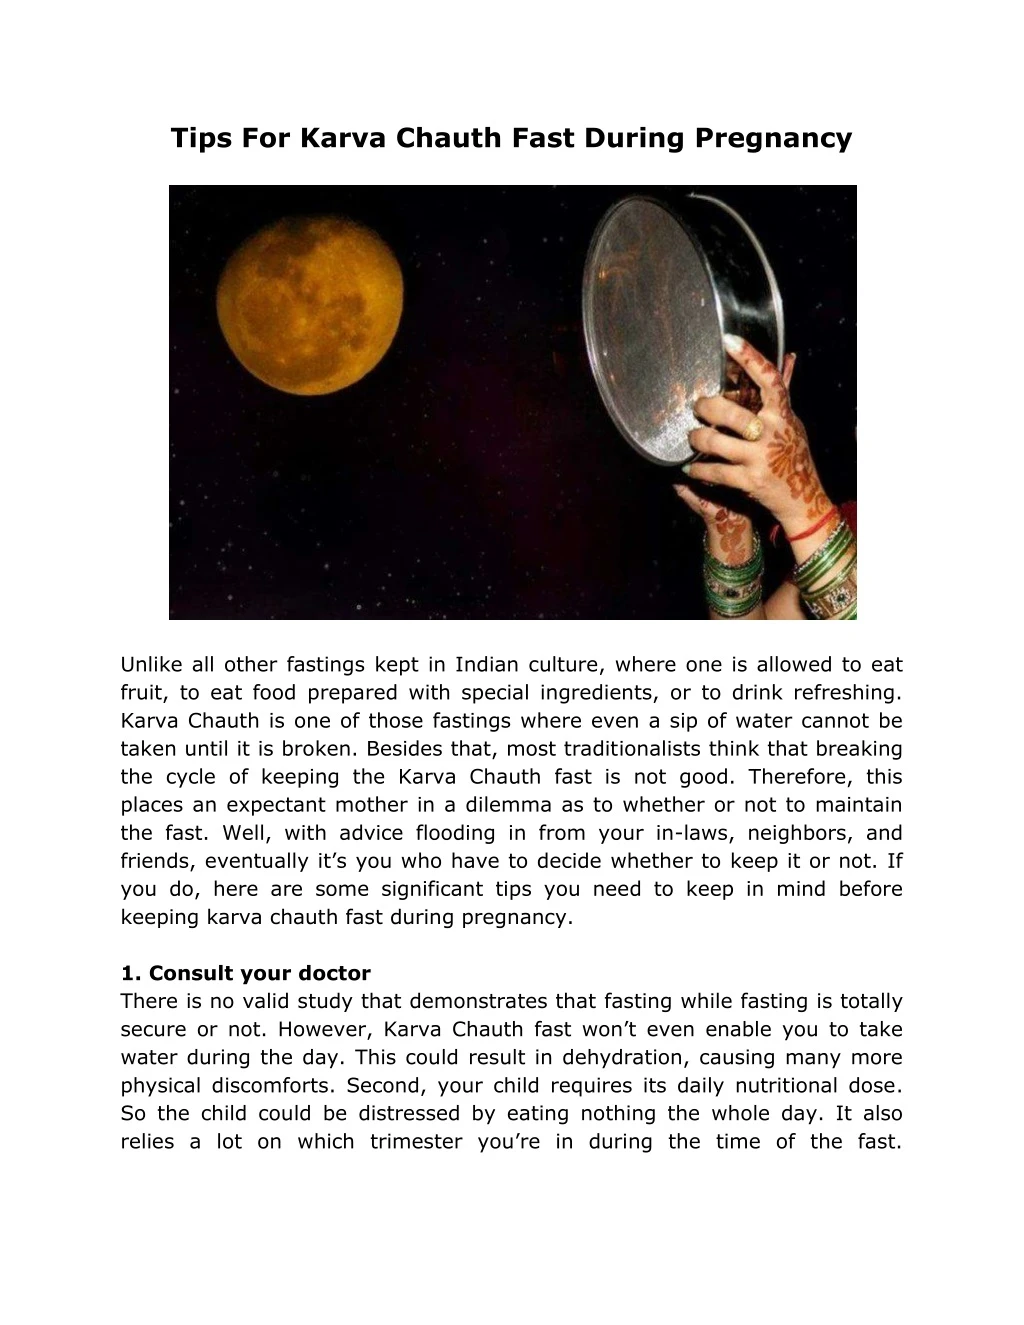 tips for karva chauth fast during pregnancy